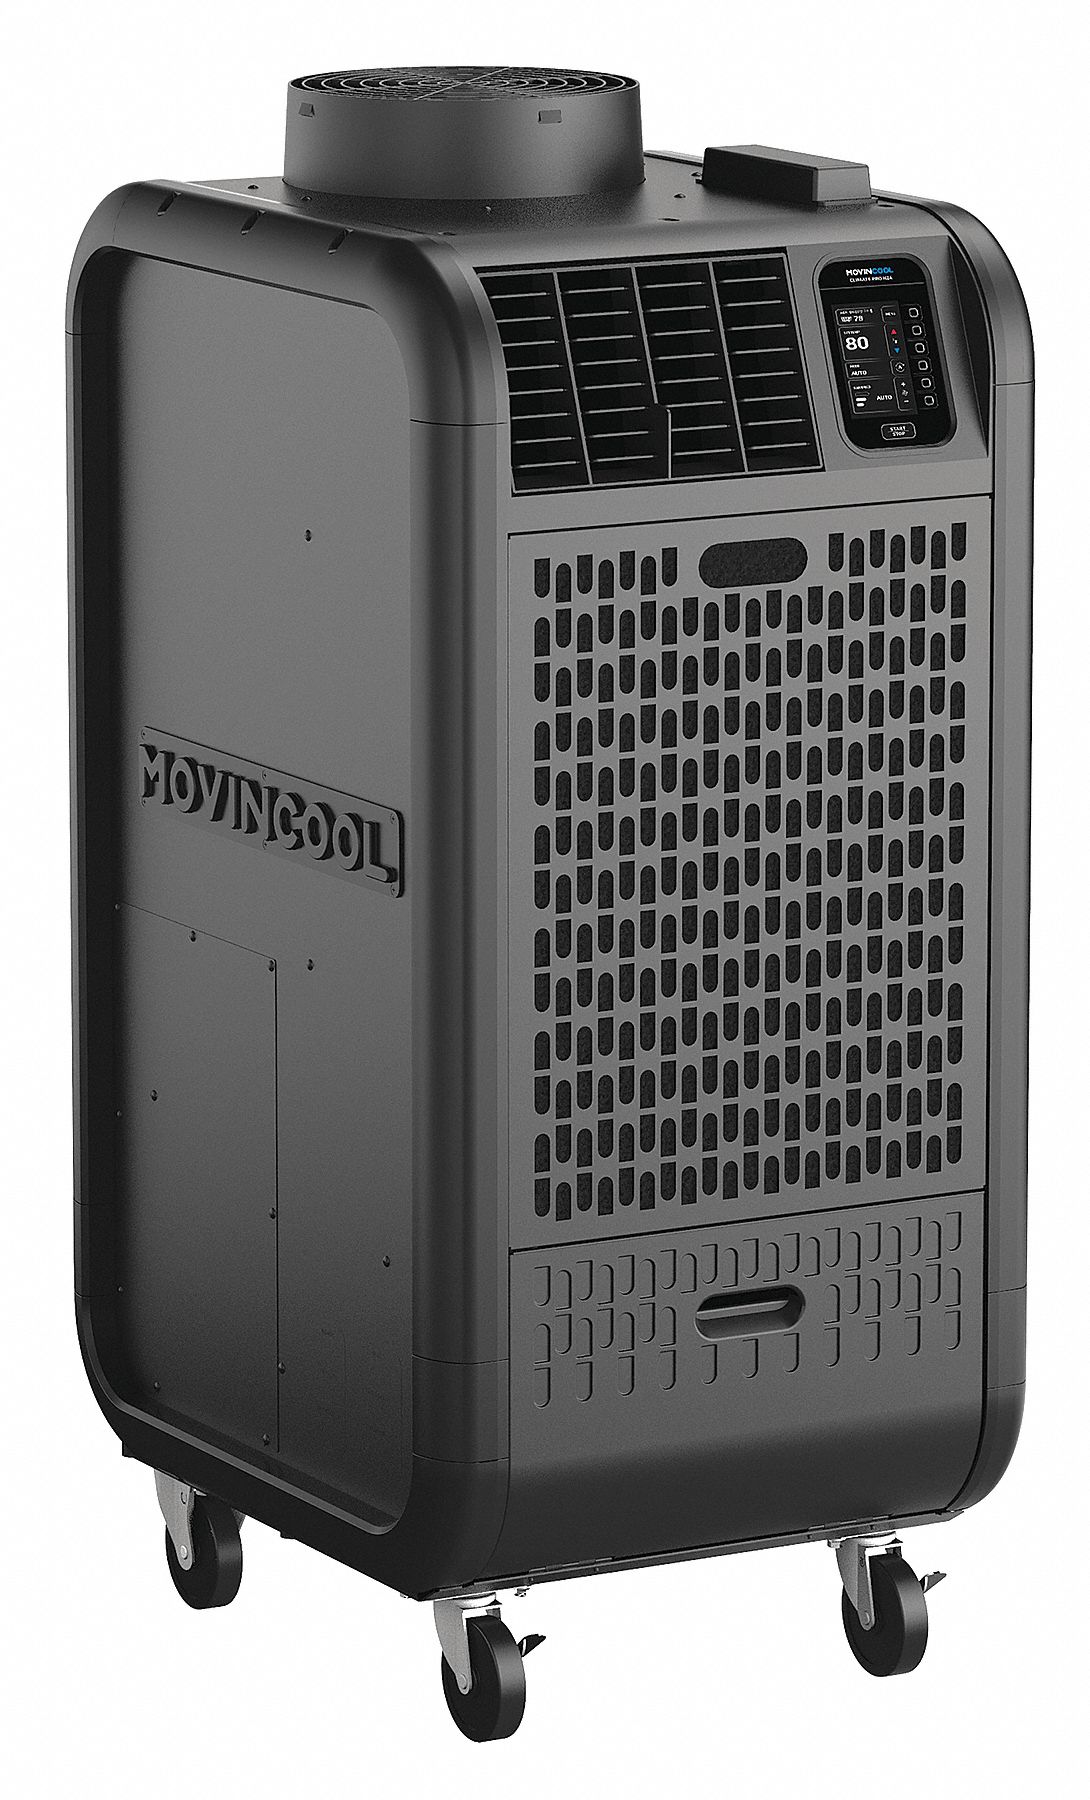 Portable Air Conditioners for sale in Las Vegas, Nevada